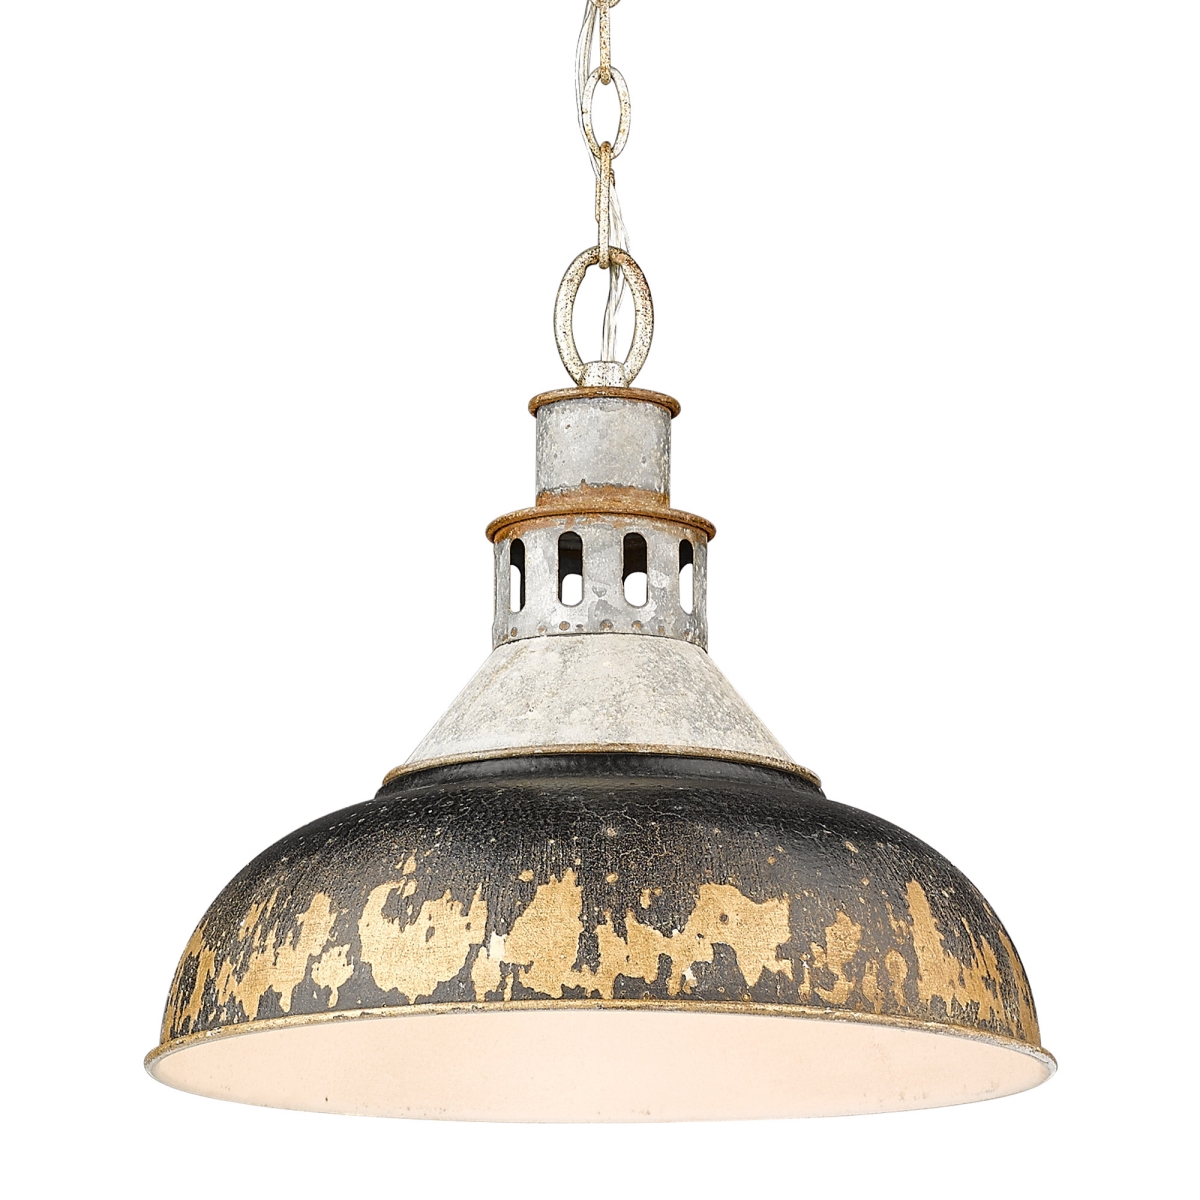 0865-l Agv-abi Kinsley Large Pendant In Aged Galvanized Steel With Antique Black Iron Shade